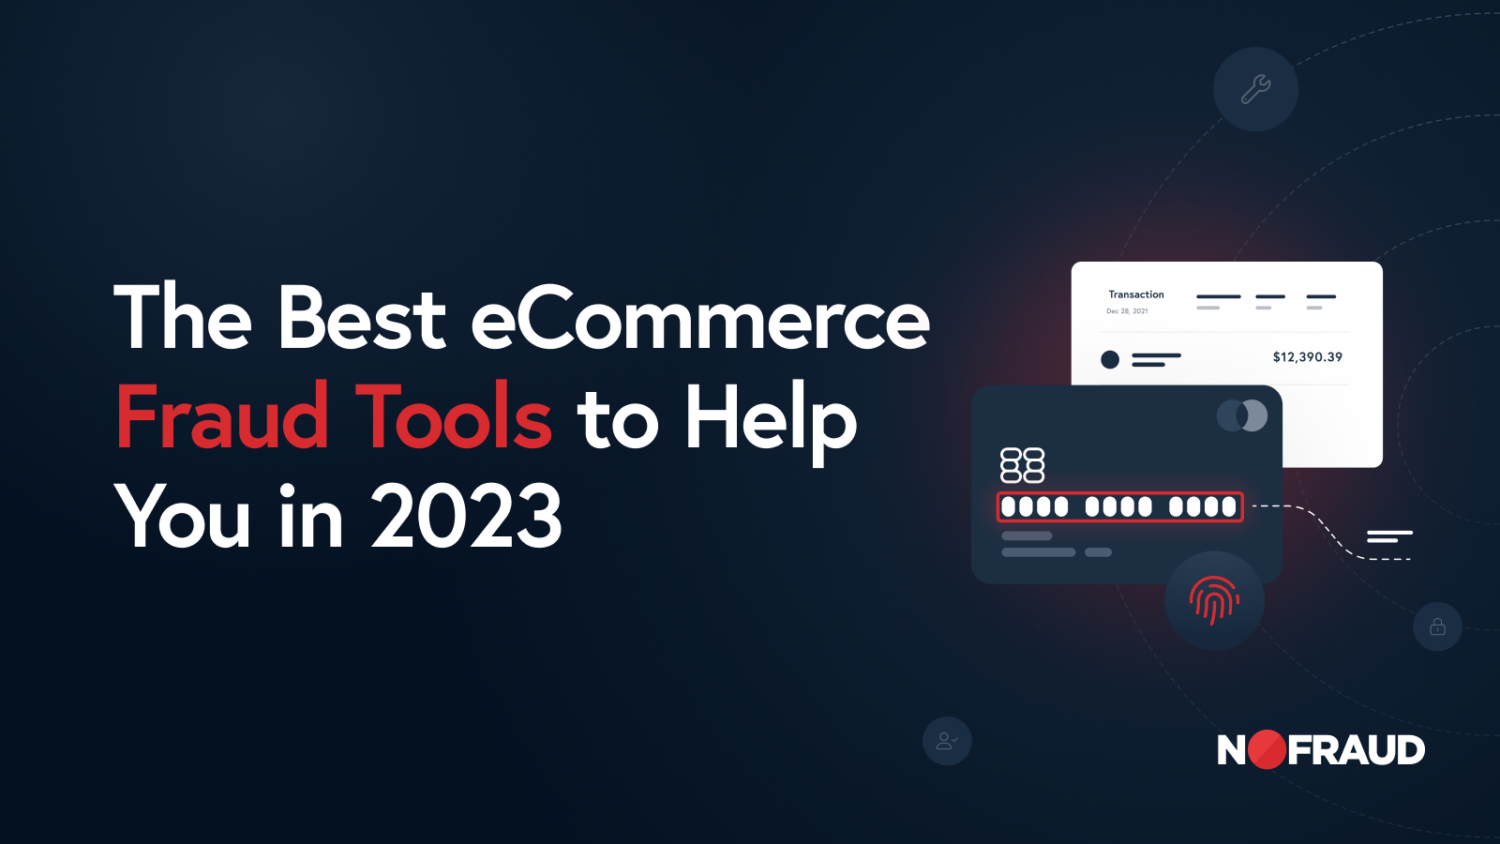 The Best eCommerce Fraud Tools to Help You in 2023